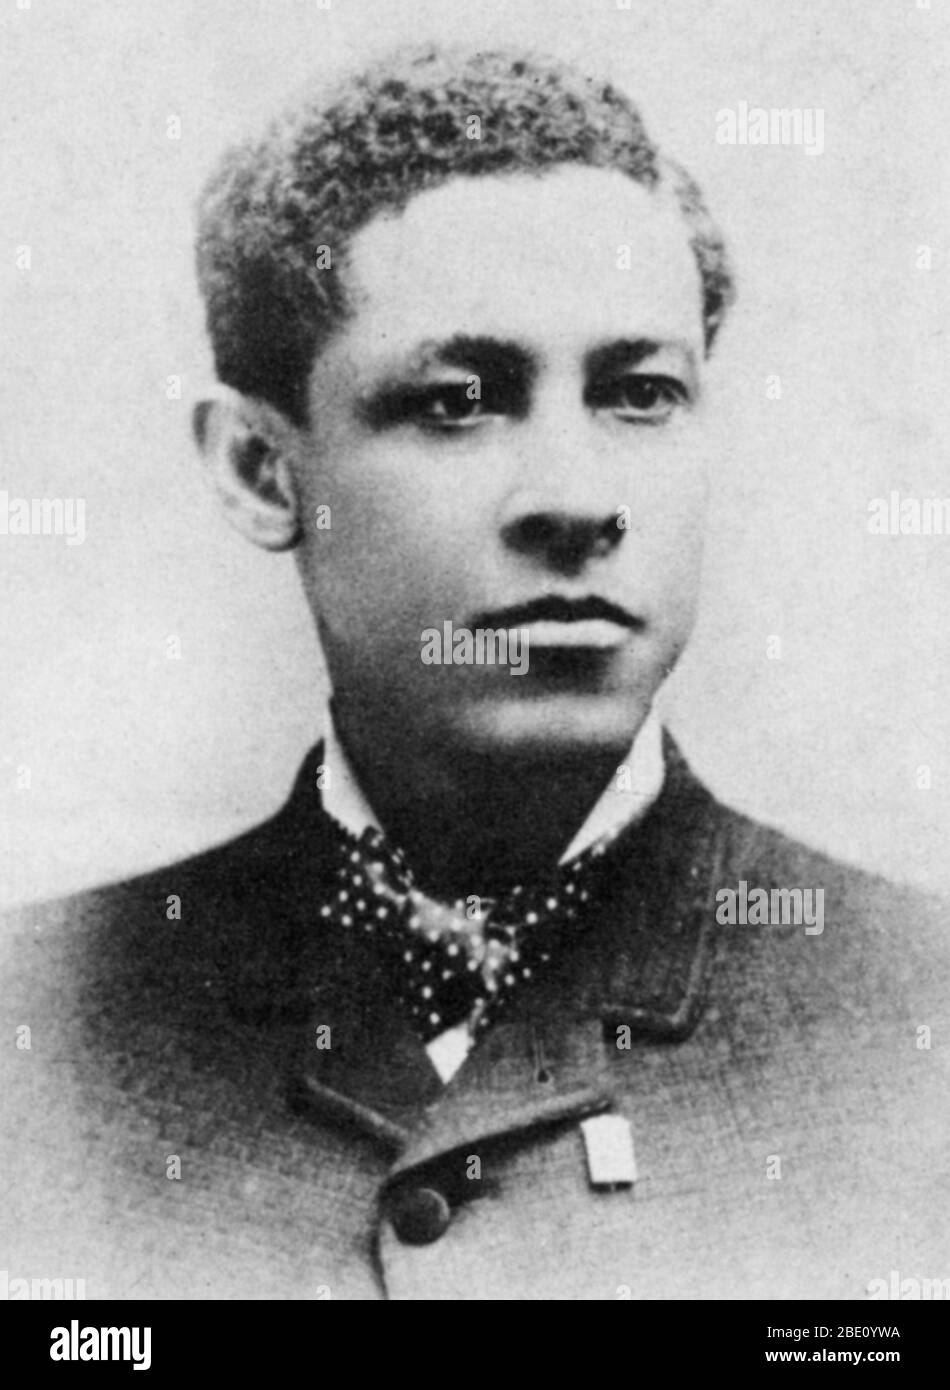 Jan Ernst Matzeliger (September 15, 1852 - August 24, 1889) was an African-American inventor in the shoe industry. In the early days of shoe making, shoes were made mainly by hand. Since the greatest difficulty in shoe making was the actual assembly of the soles to the upper shoe, it required great skill to tack and sew the two components together. At the time, no machine could attach the upper part of a shoe to the sole. This had to be done manually by a 'hand laster'; a skilled one could produce 50 pairs in a 10 hour day. After five years of work, Matzeliger obtained a patent for his inventi Stock Photo